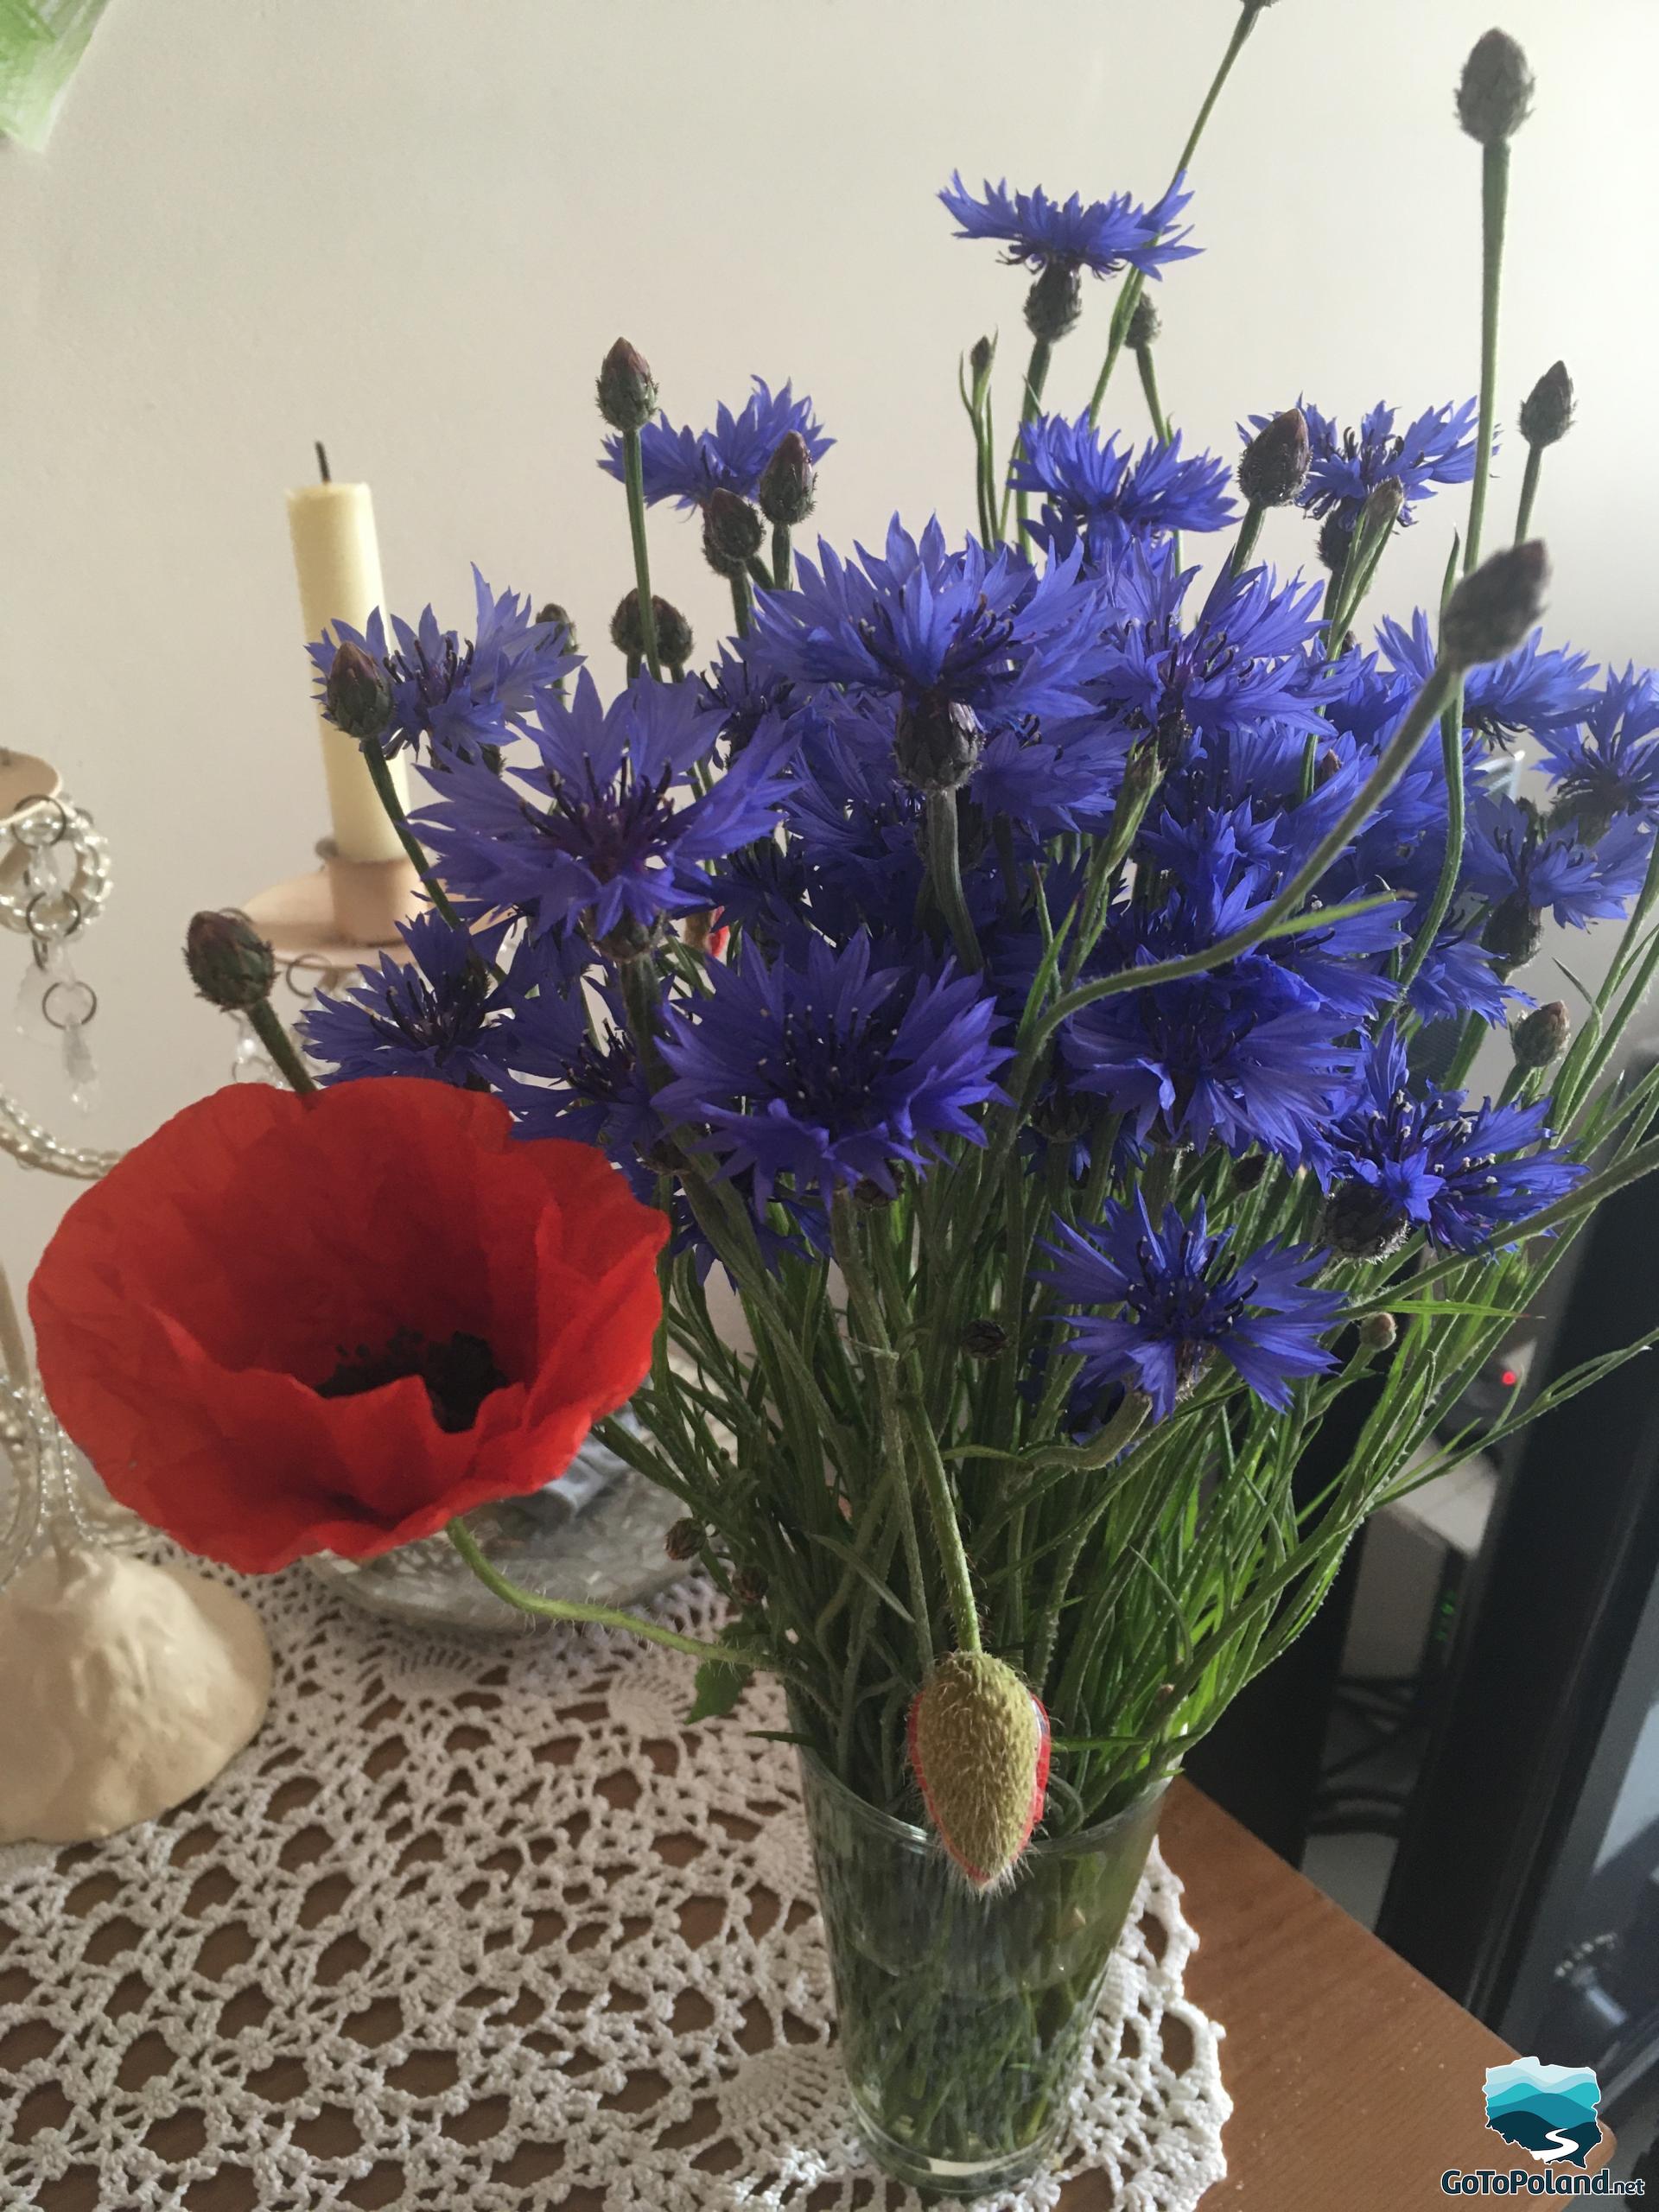 One red poppy and blue cornflowers in a crystal vase standing on the table 